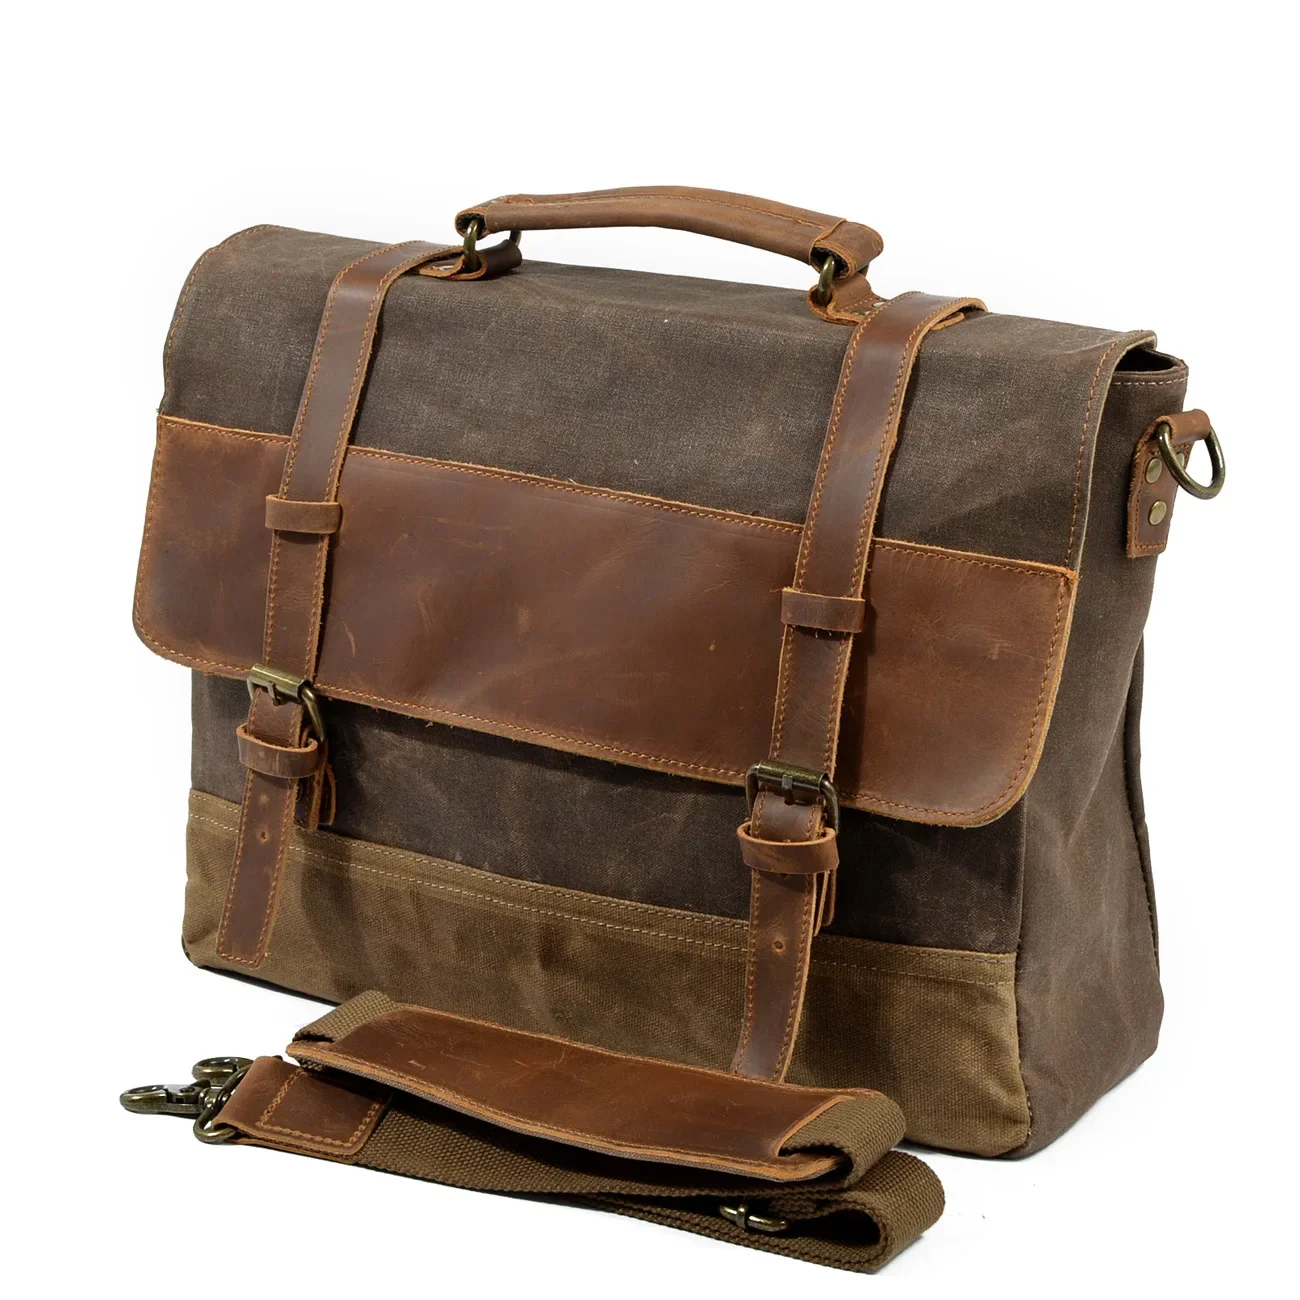  wax canvas with leather briefcase retro business men s bag shoulder messenger portable thumb200